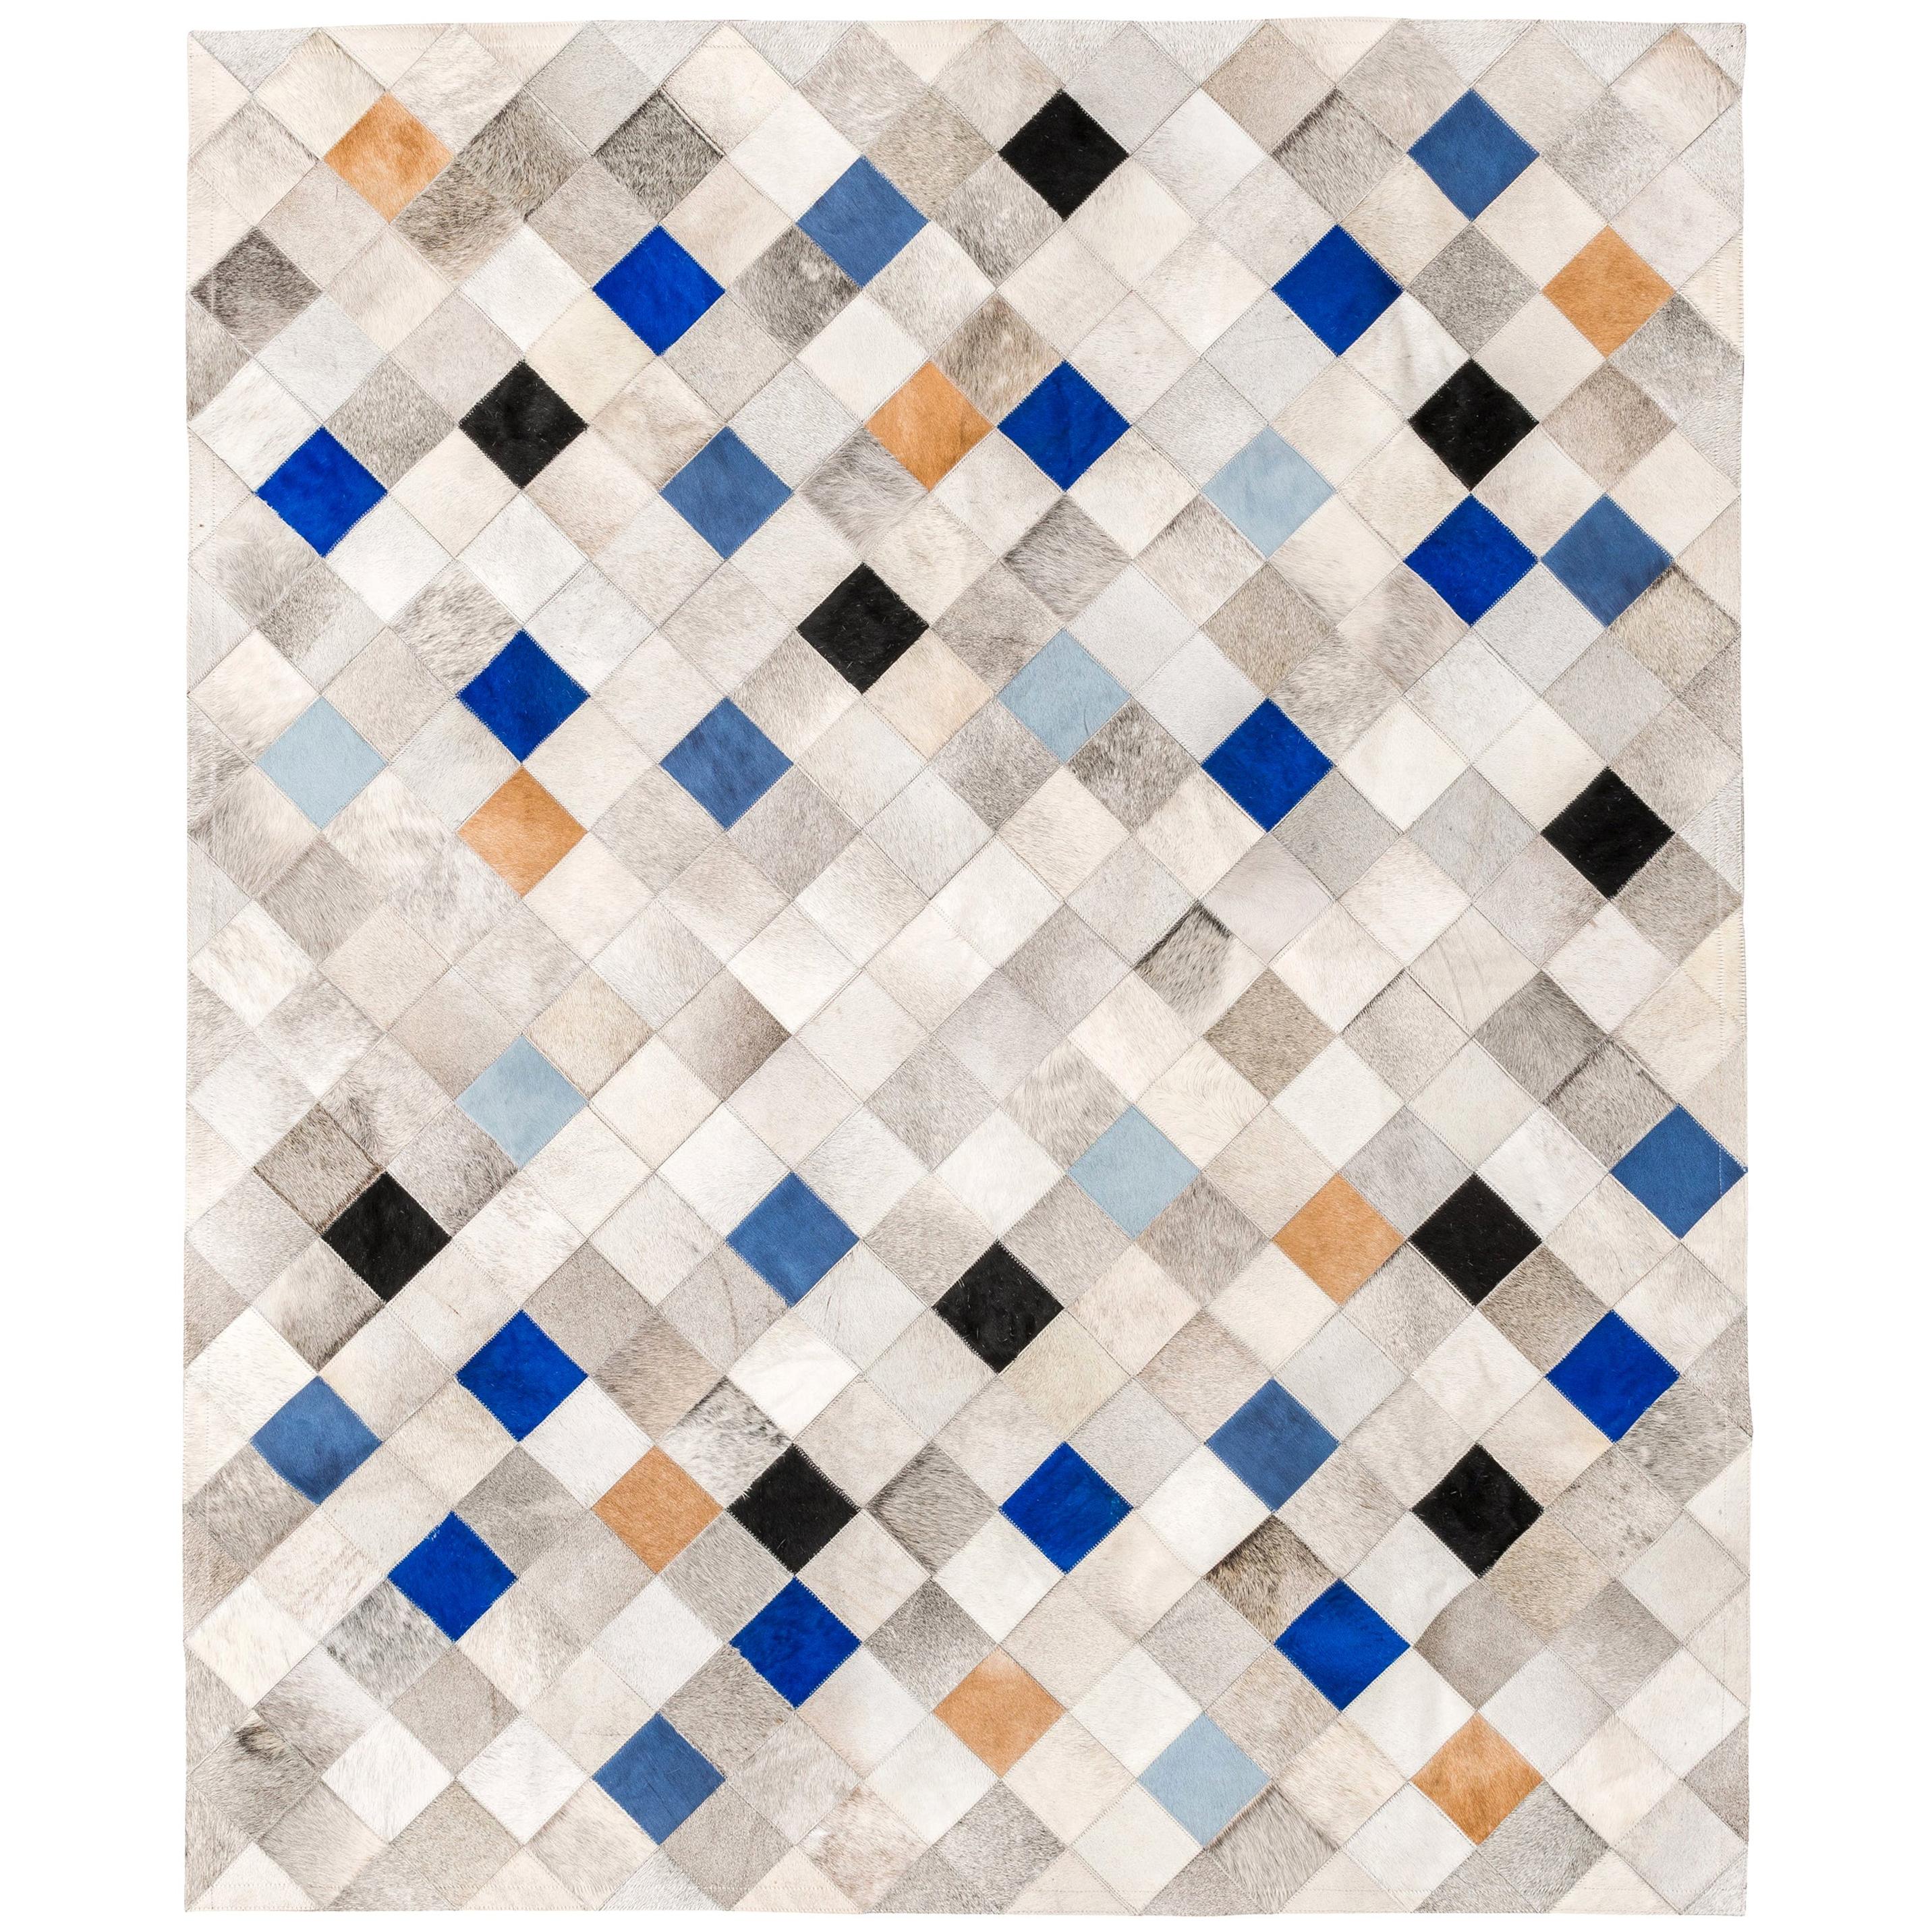 Gray, Blue and Caramel Falling Squares Cowhide Area Floor Rug X-Large For Sale